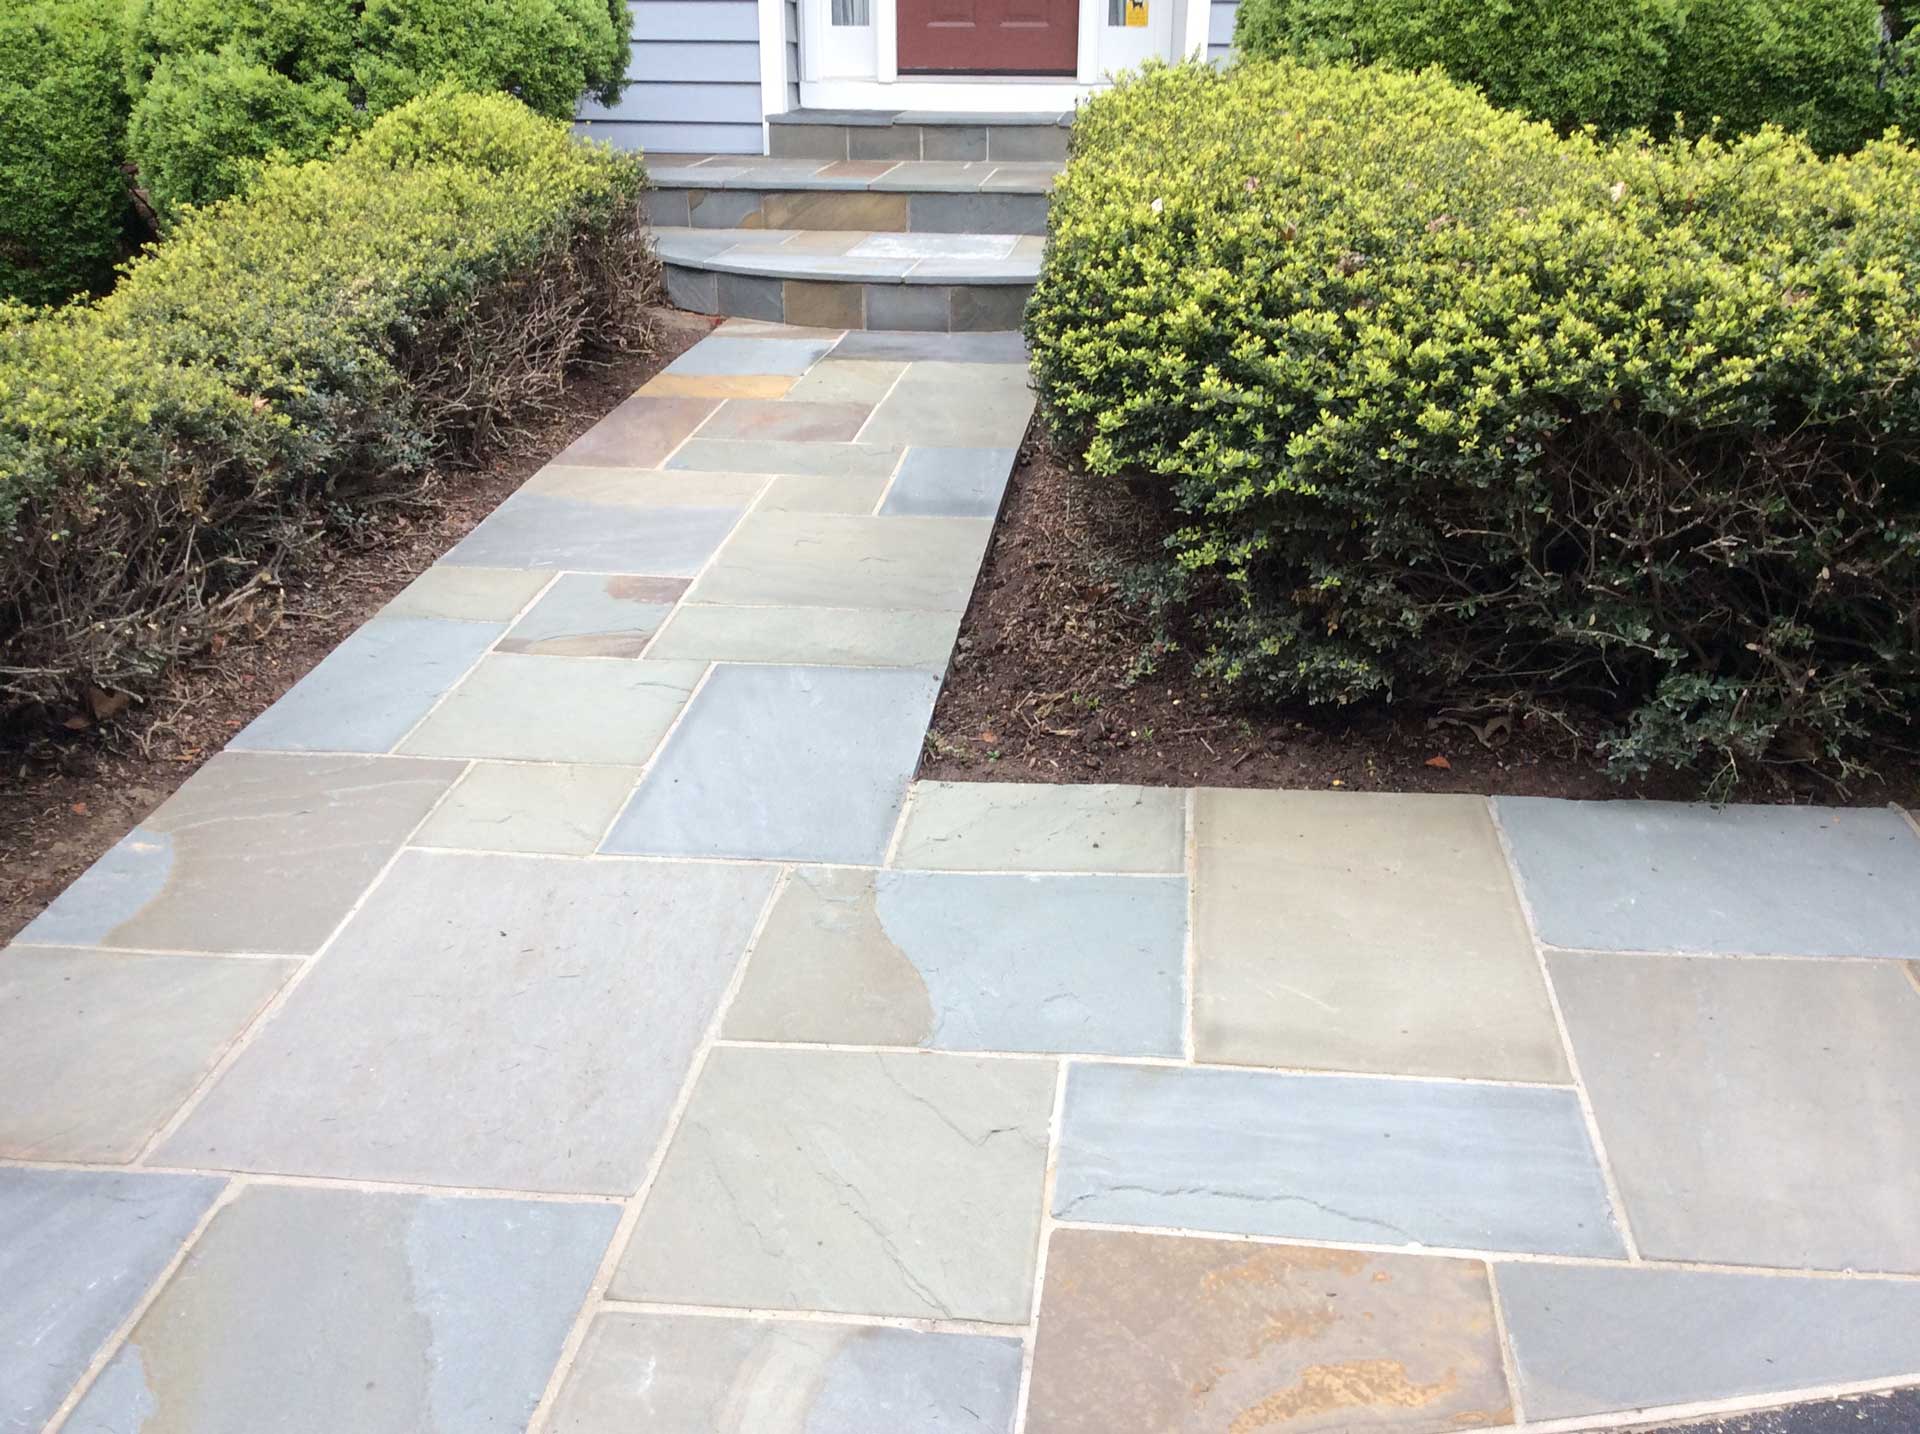 New flagstone walkway front of home by Capital Masonry